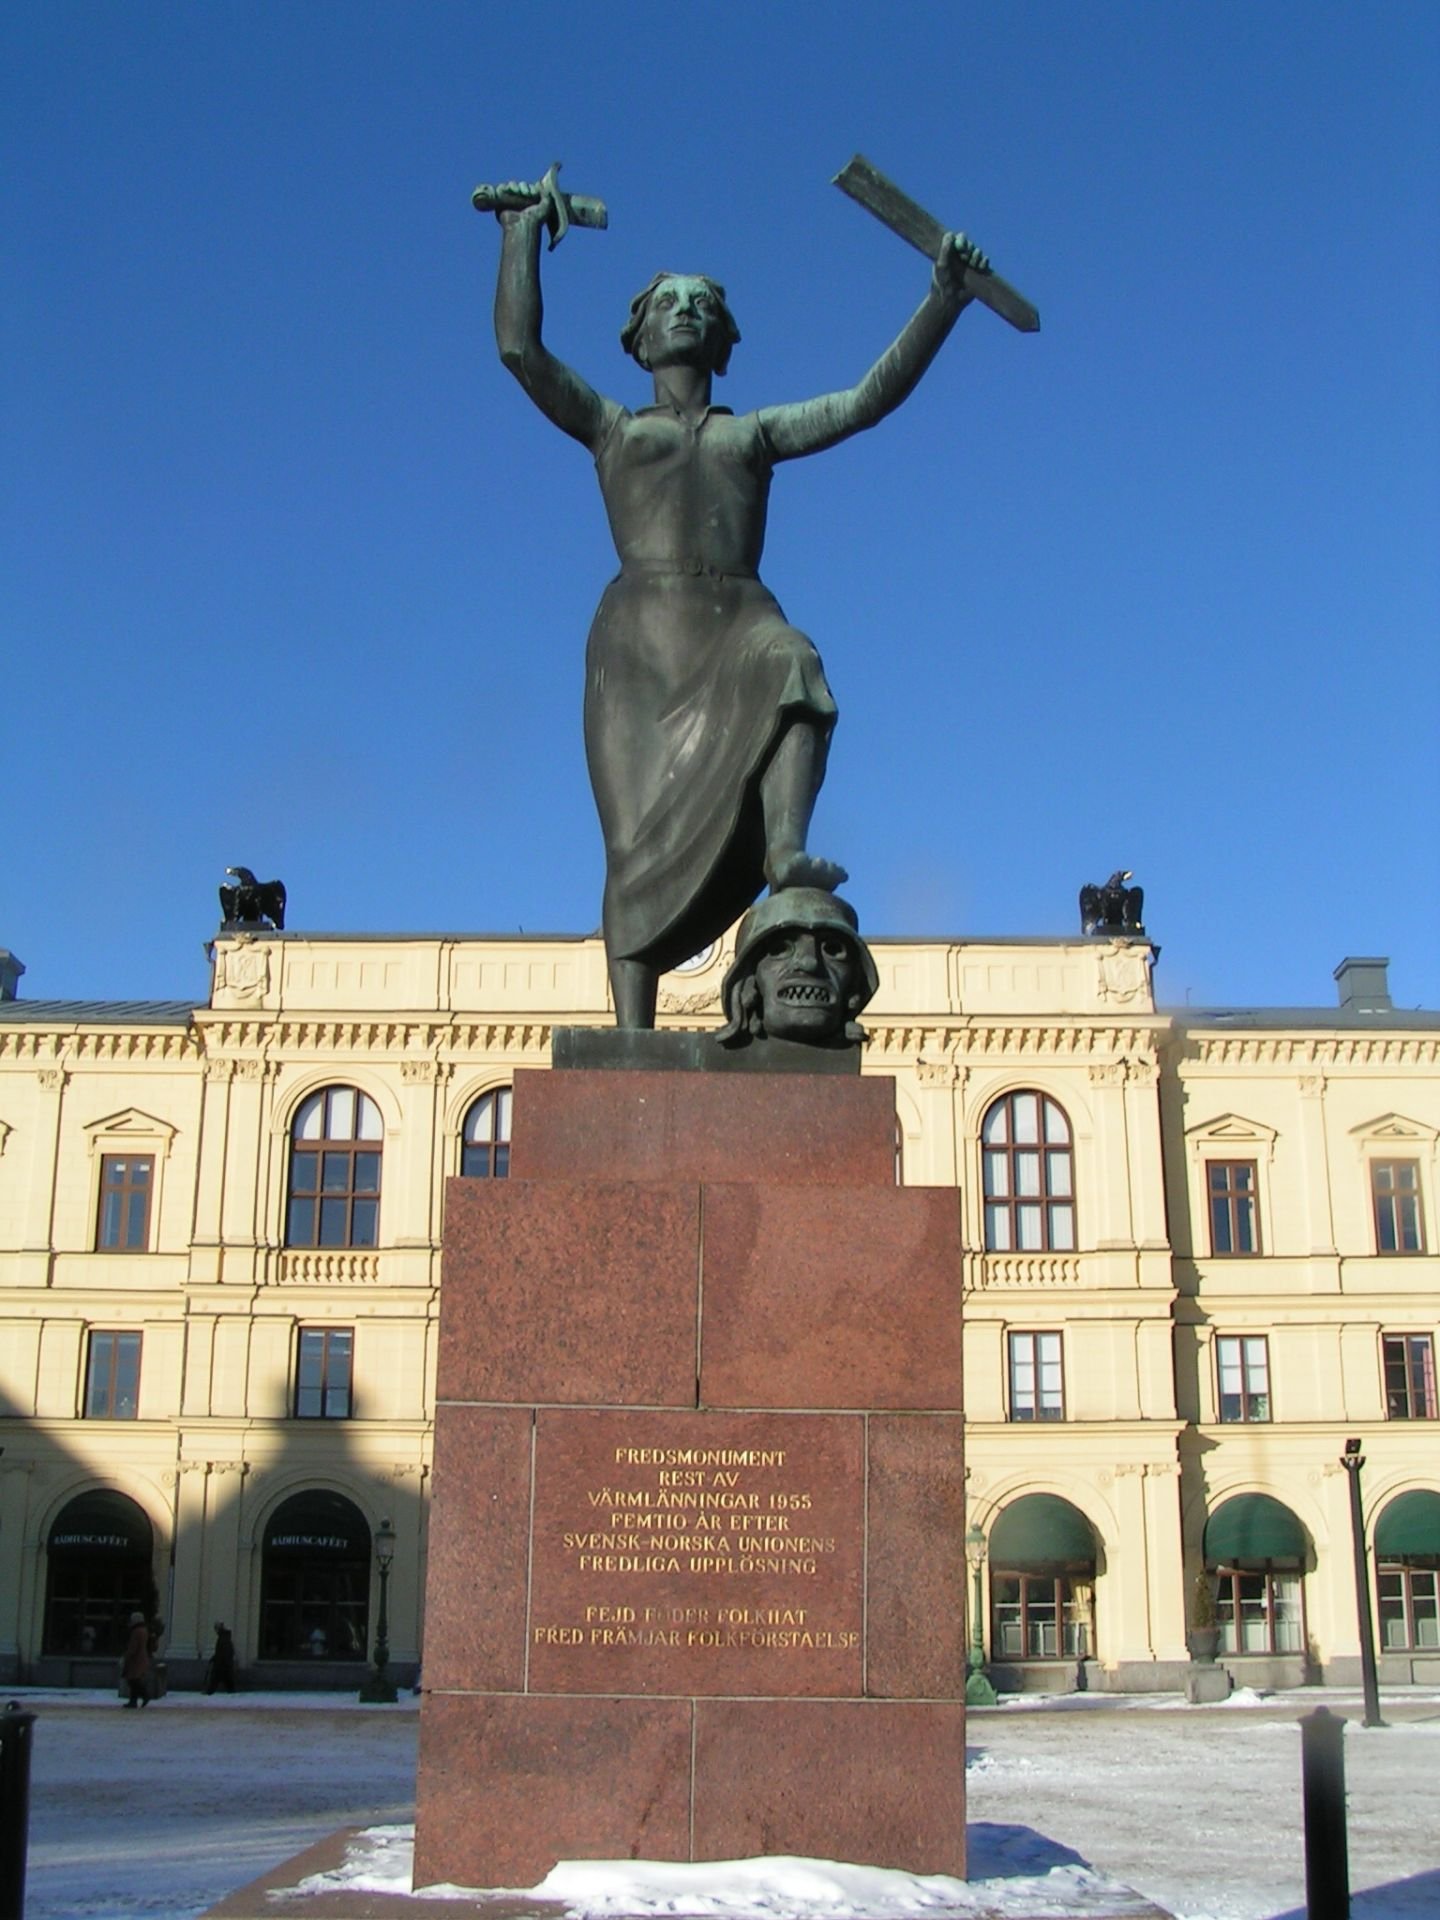 The Peace monument at the Town Square